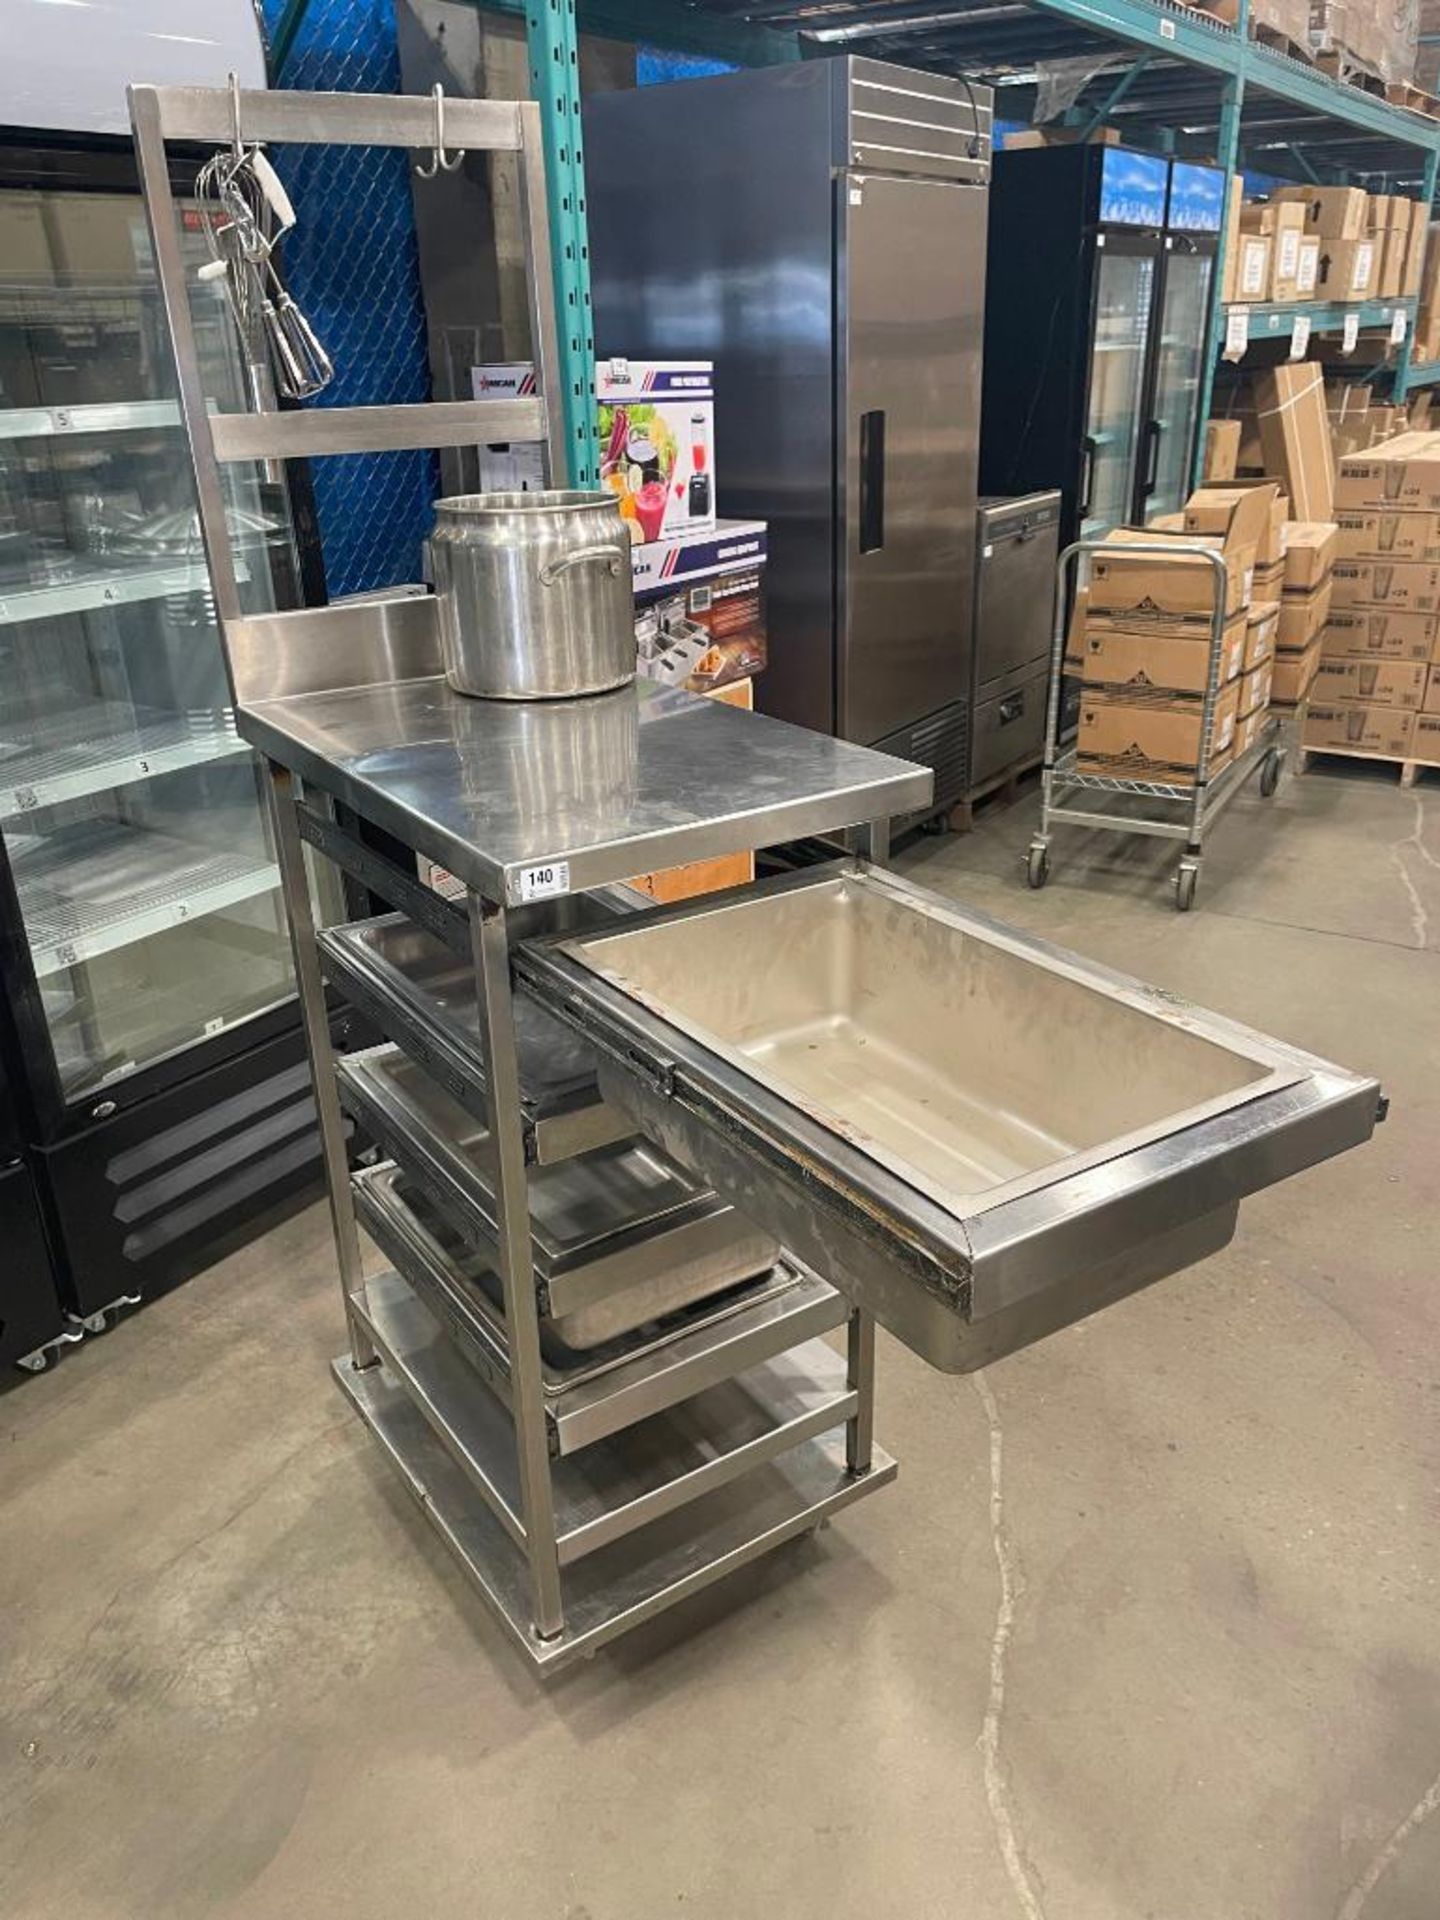 STAINLESS STEEL MOBILE PREP TABLE WITH 4 DRAWERS & POT RACK - Image 6 of 11